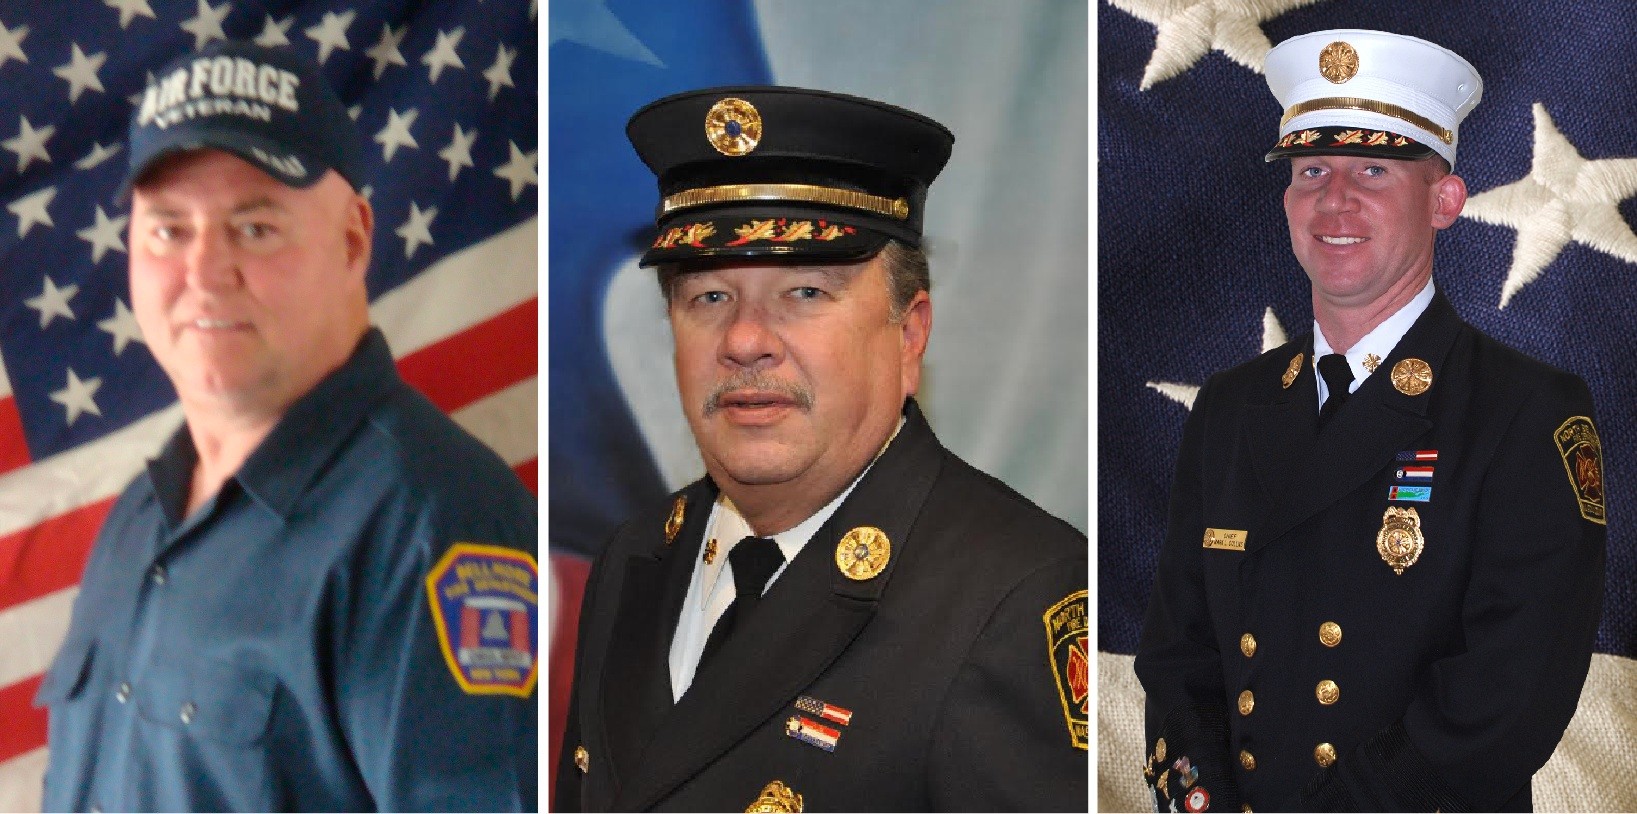 The firefighters running for a position on their respective boards of commissioners are, from left, Bellmore candidate Richard Holzhauer; North Bellmore candidate Robert Bazarewski; and North Bellmore candidate Mark Collins.